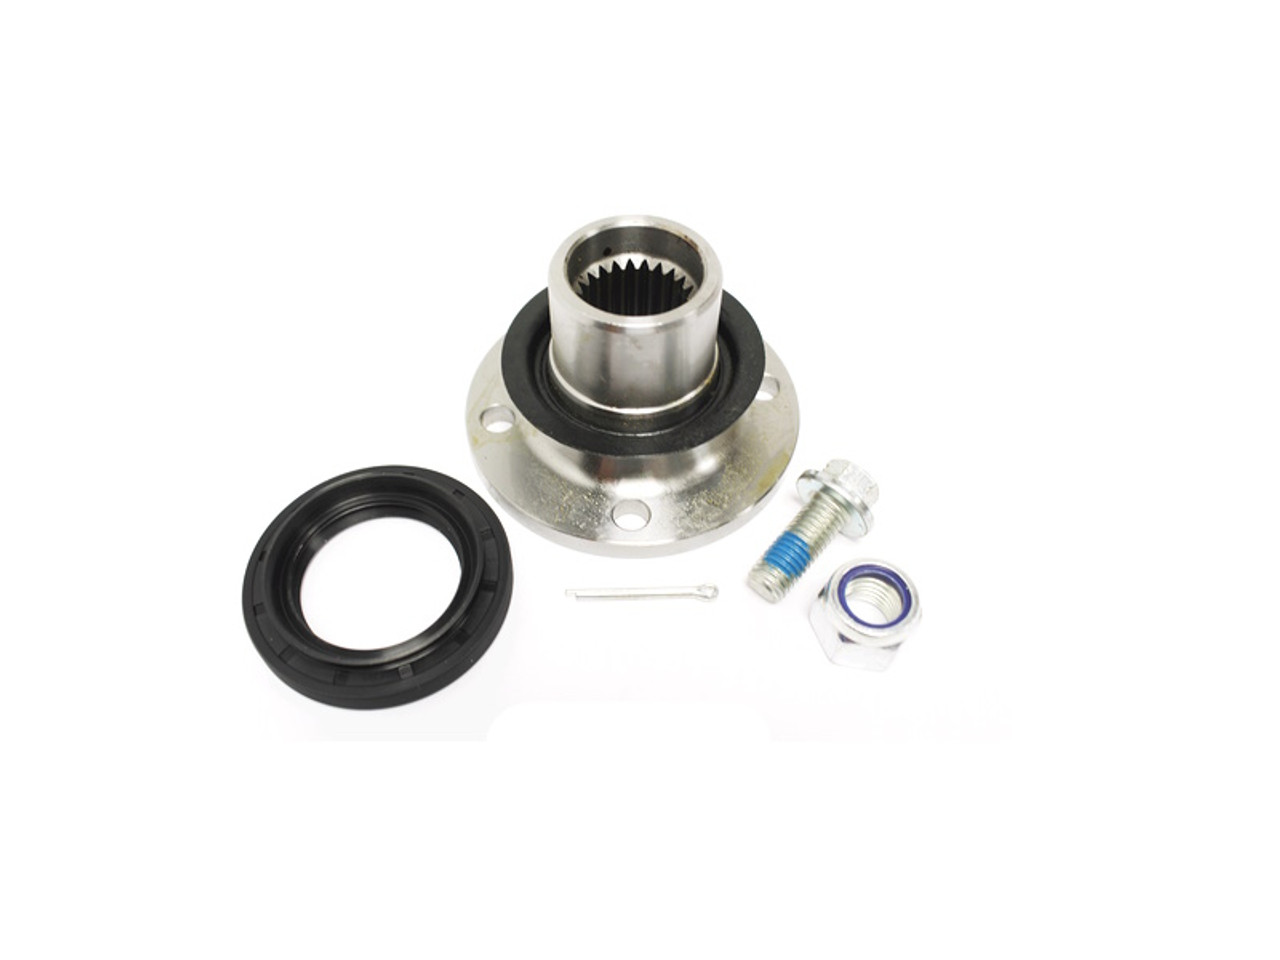 Allmakes 4x4 4 Bolt Front and Rear Diff Flange Kit - STC4858